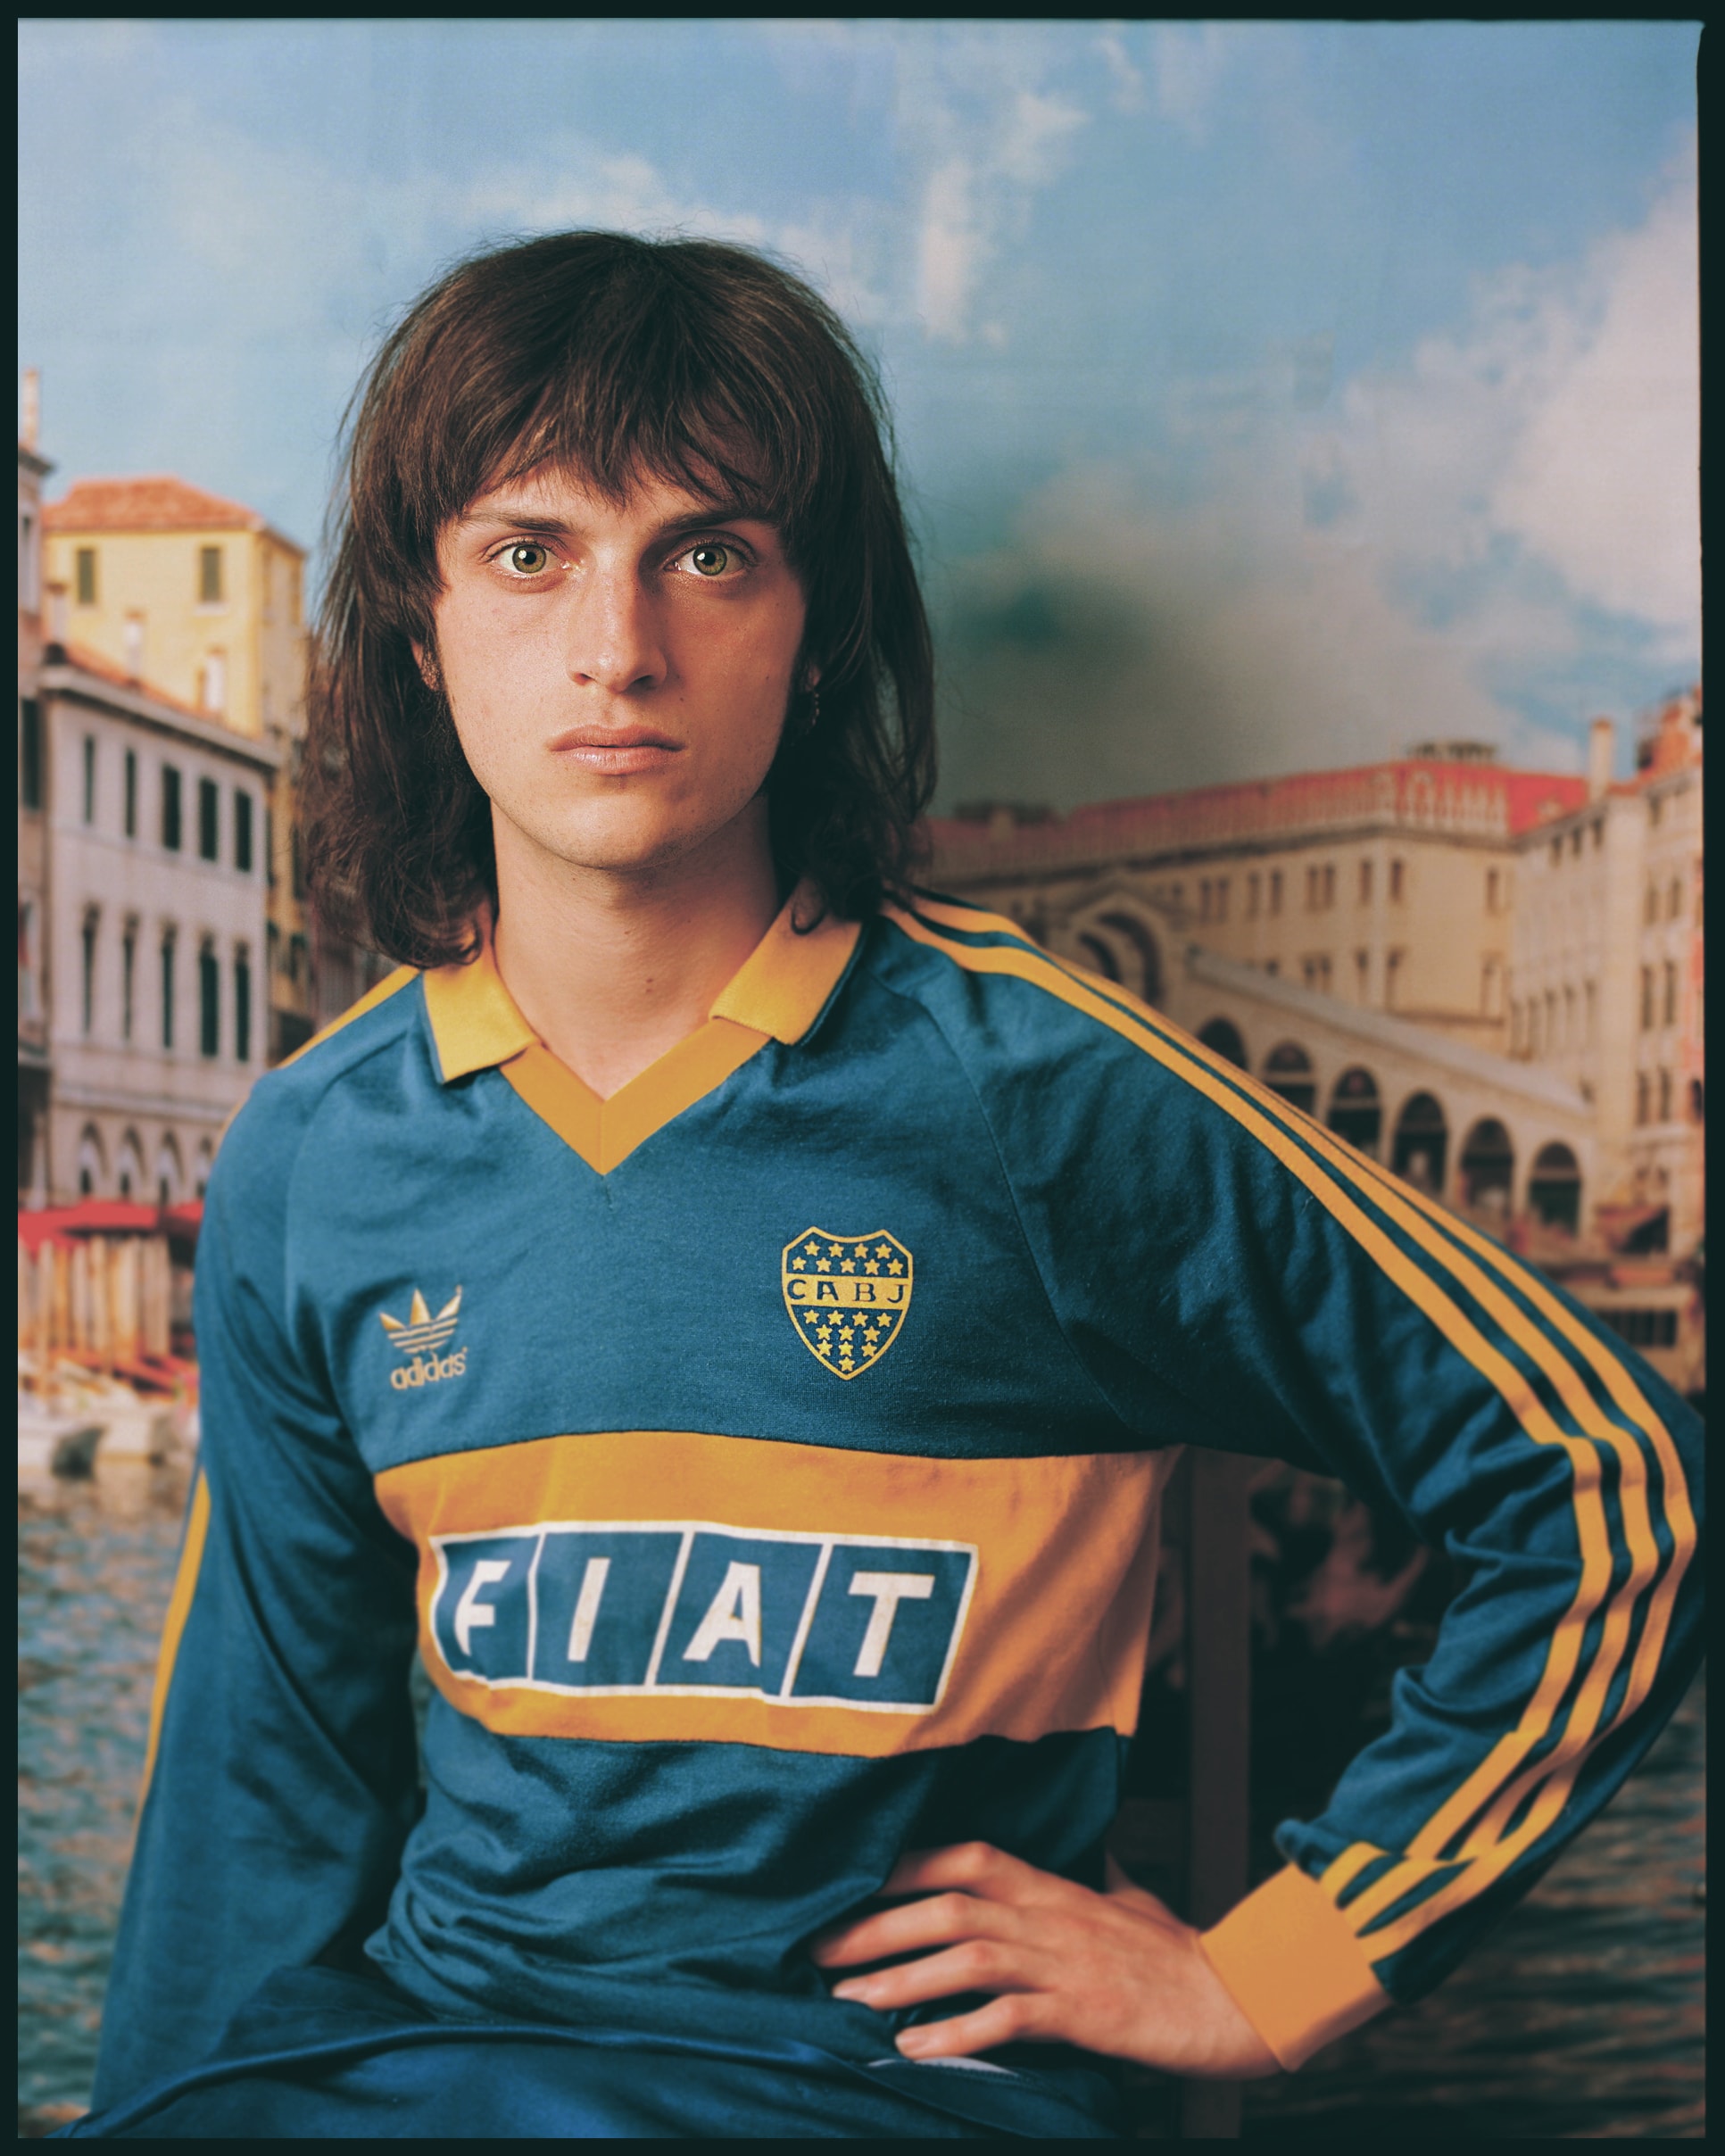 Art History Meets Football Kit Royalty in Louis Bever's Intimate Portraiture